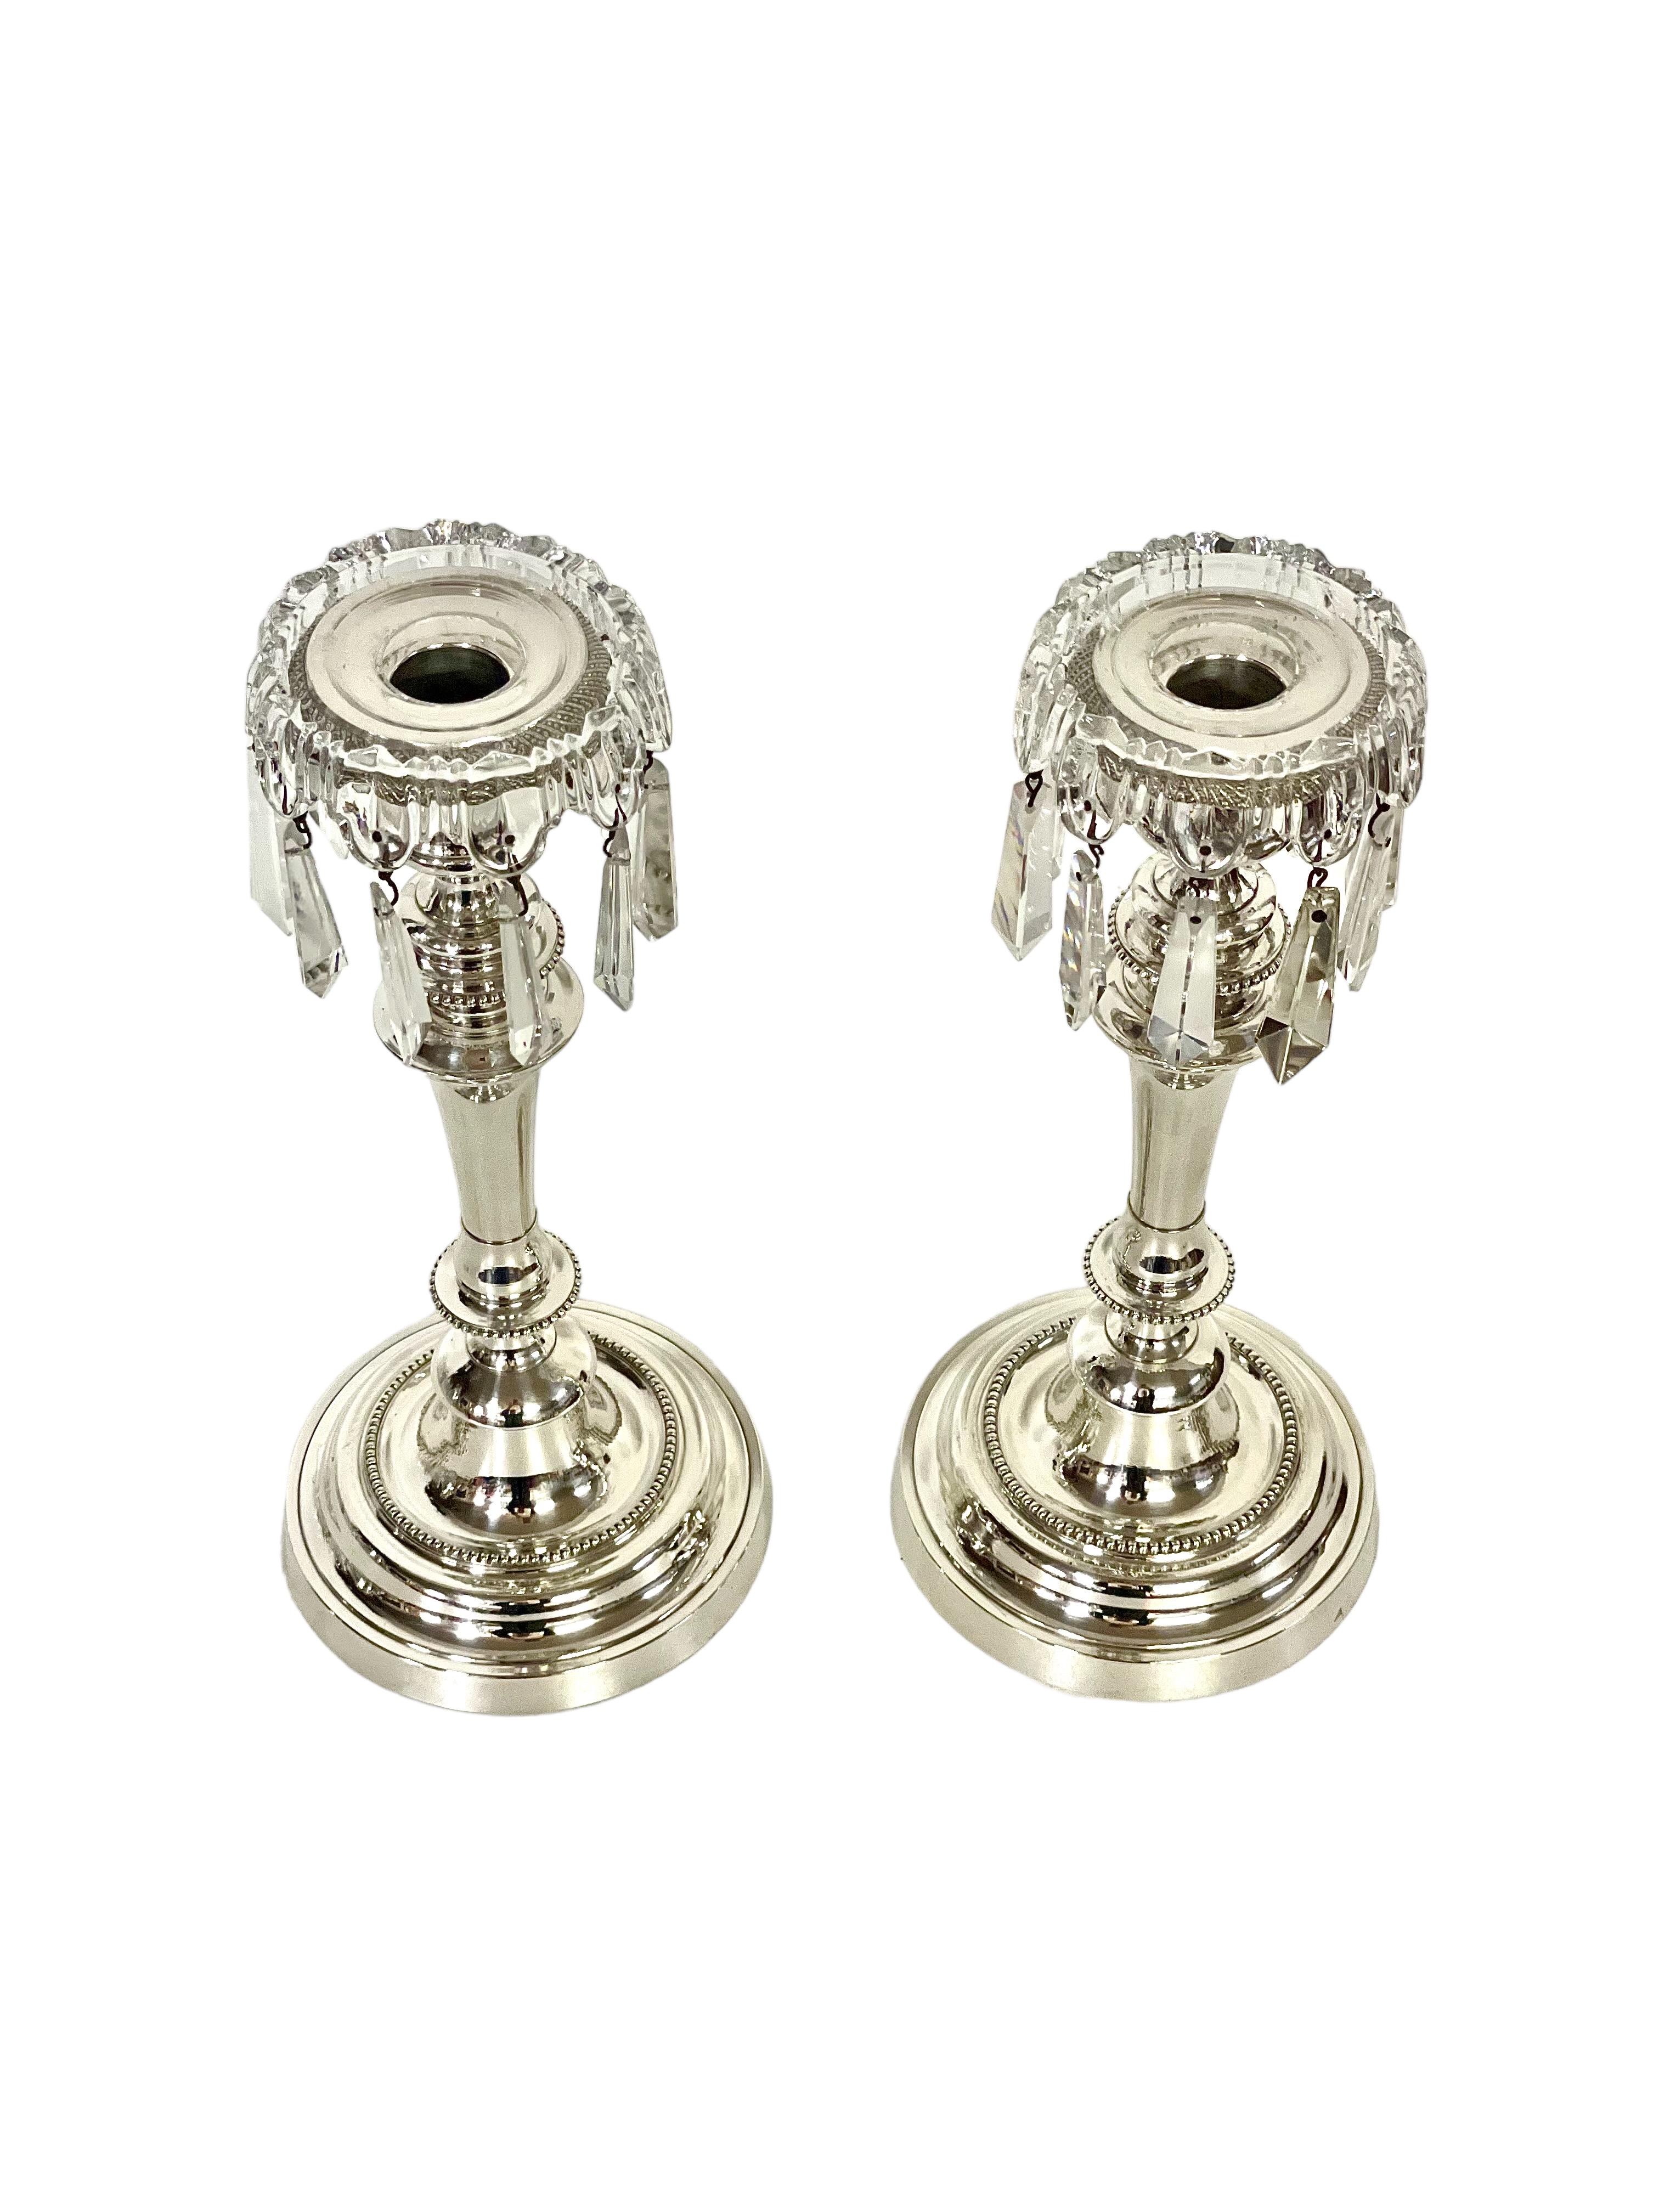 A very fine pair of antique silver-plated candle holders in the Louis XVI style, dating from the 19th century, each topped with a cut crystal drip tray and featuring a glittering fringe of crystal tassel drops. The candlesticks are expertly cast,